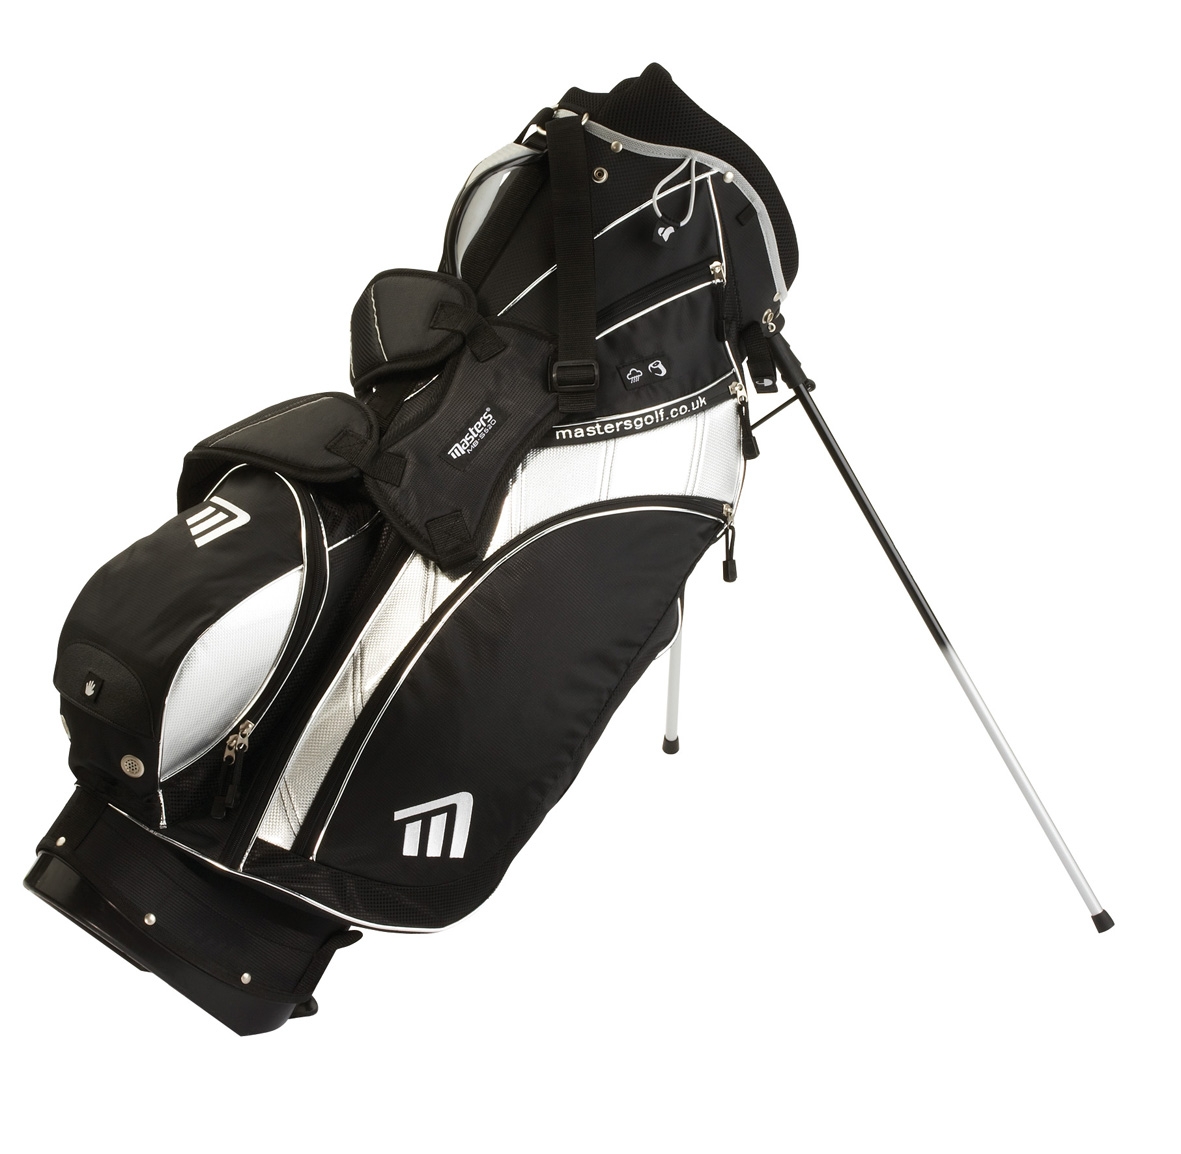 Masters Golf Mb-S520 Stand Bag